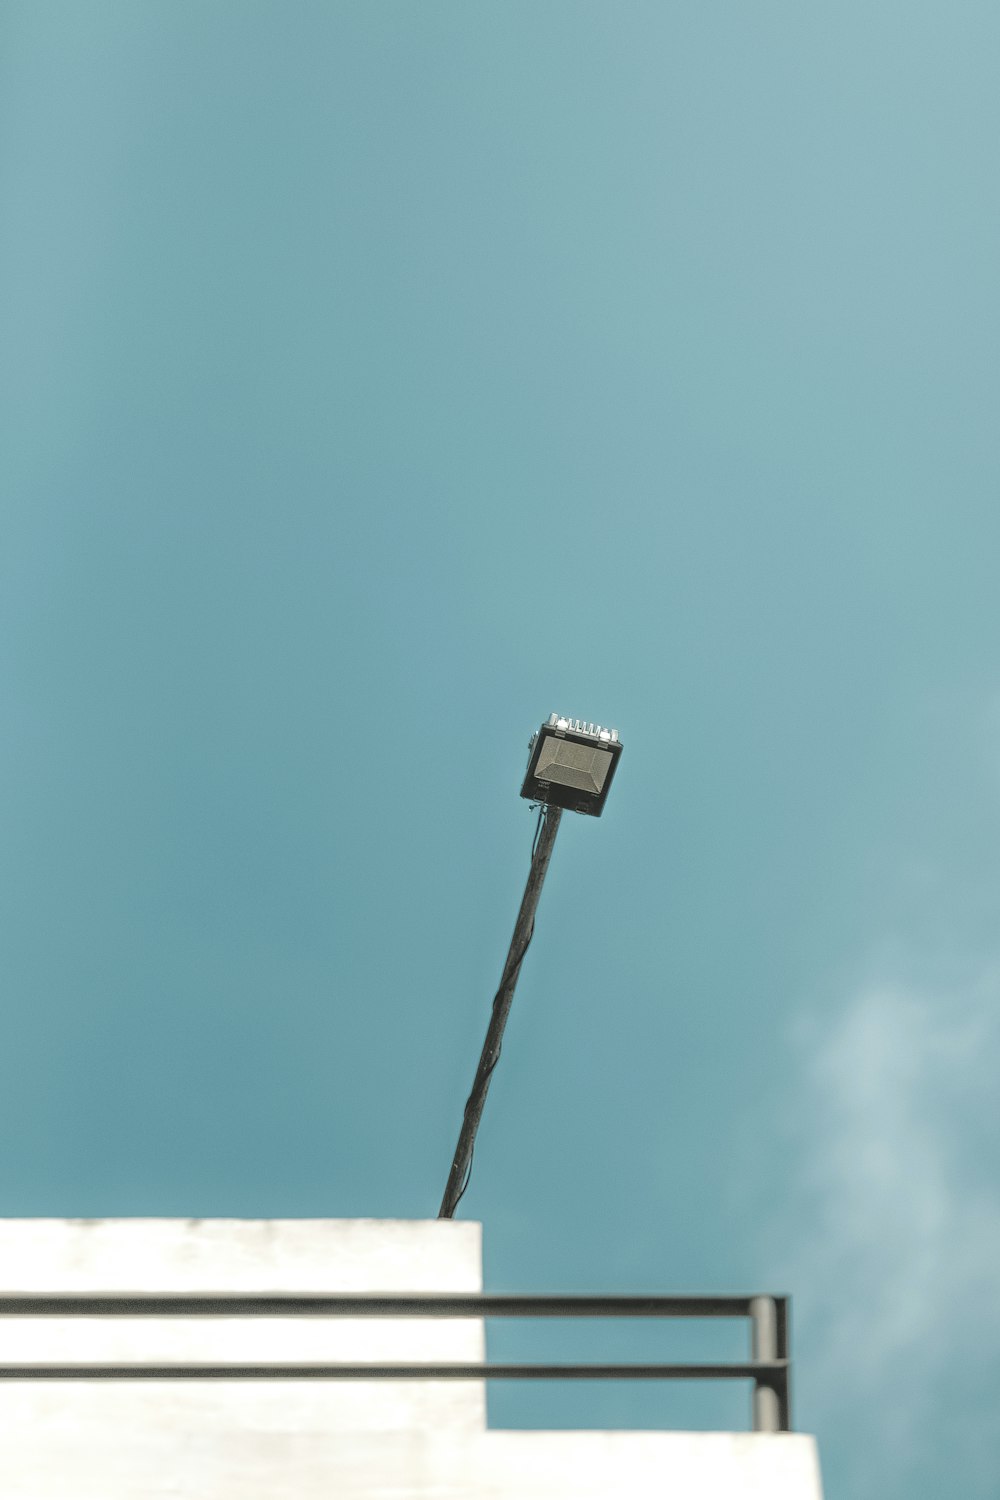 a street light sitting on top of a white building